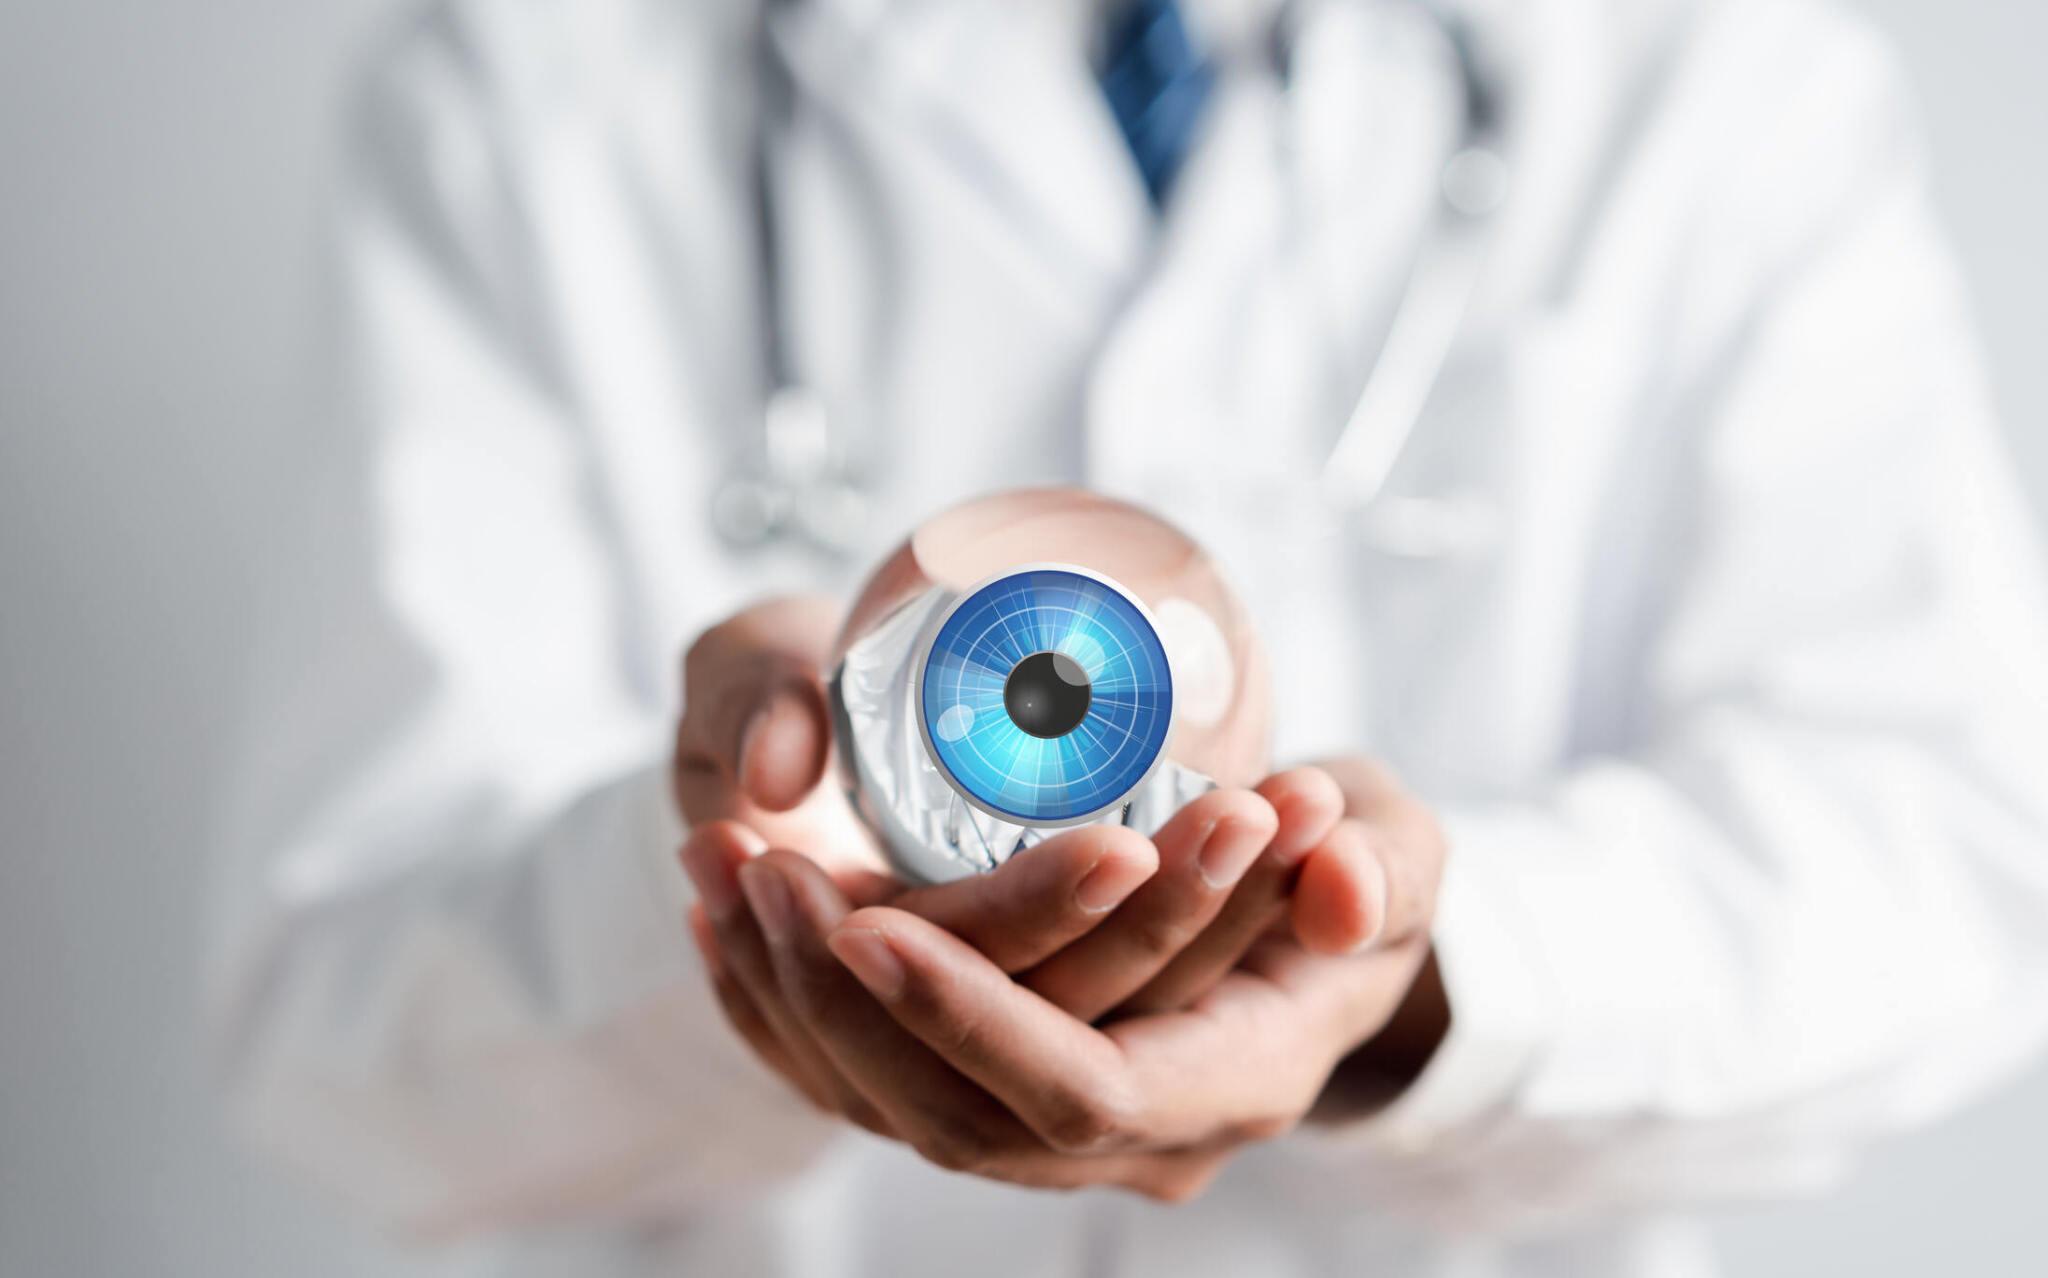 What to do before Laser eye surgery (LASIK)?